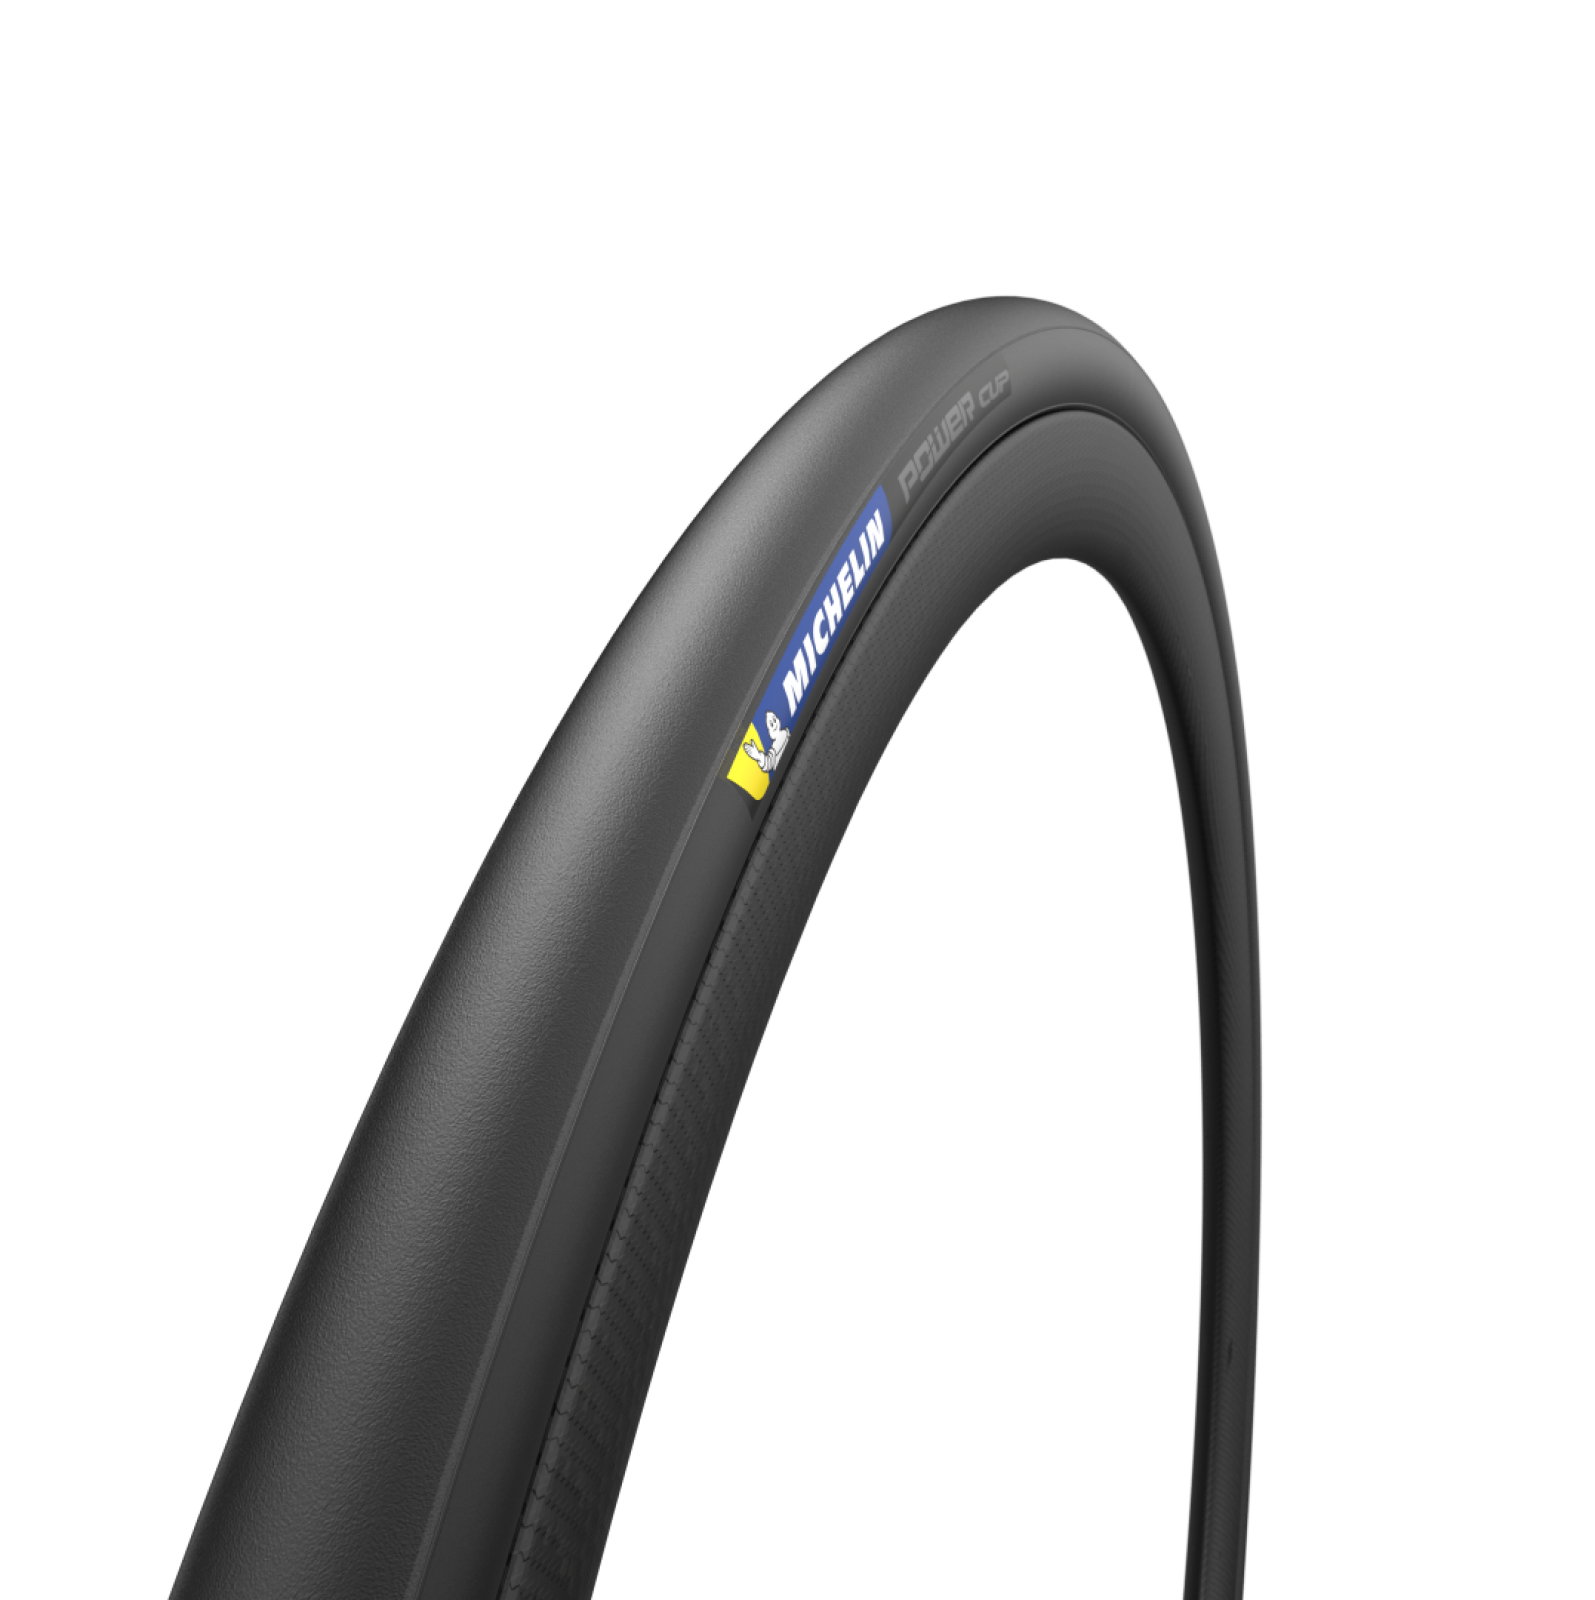 MICHELIN POWER CUP CLASSIC road bike tyre